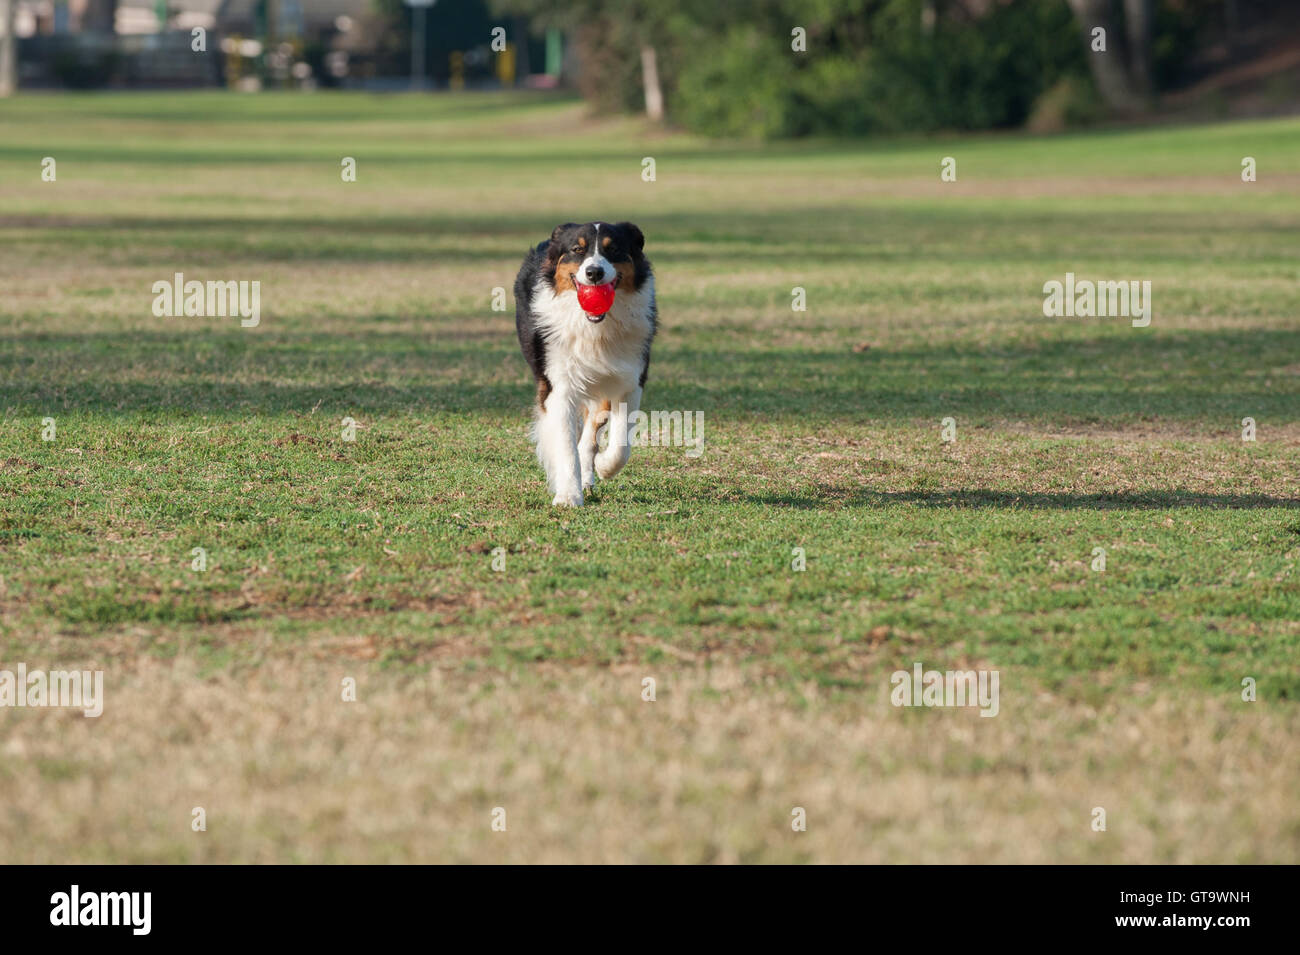 Australian Shepard dog running in grass at park with ball Stock Photo